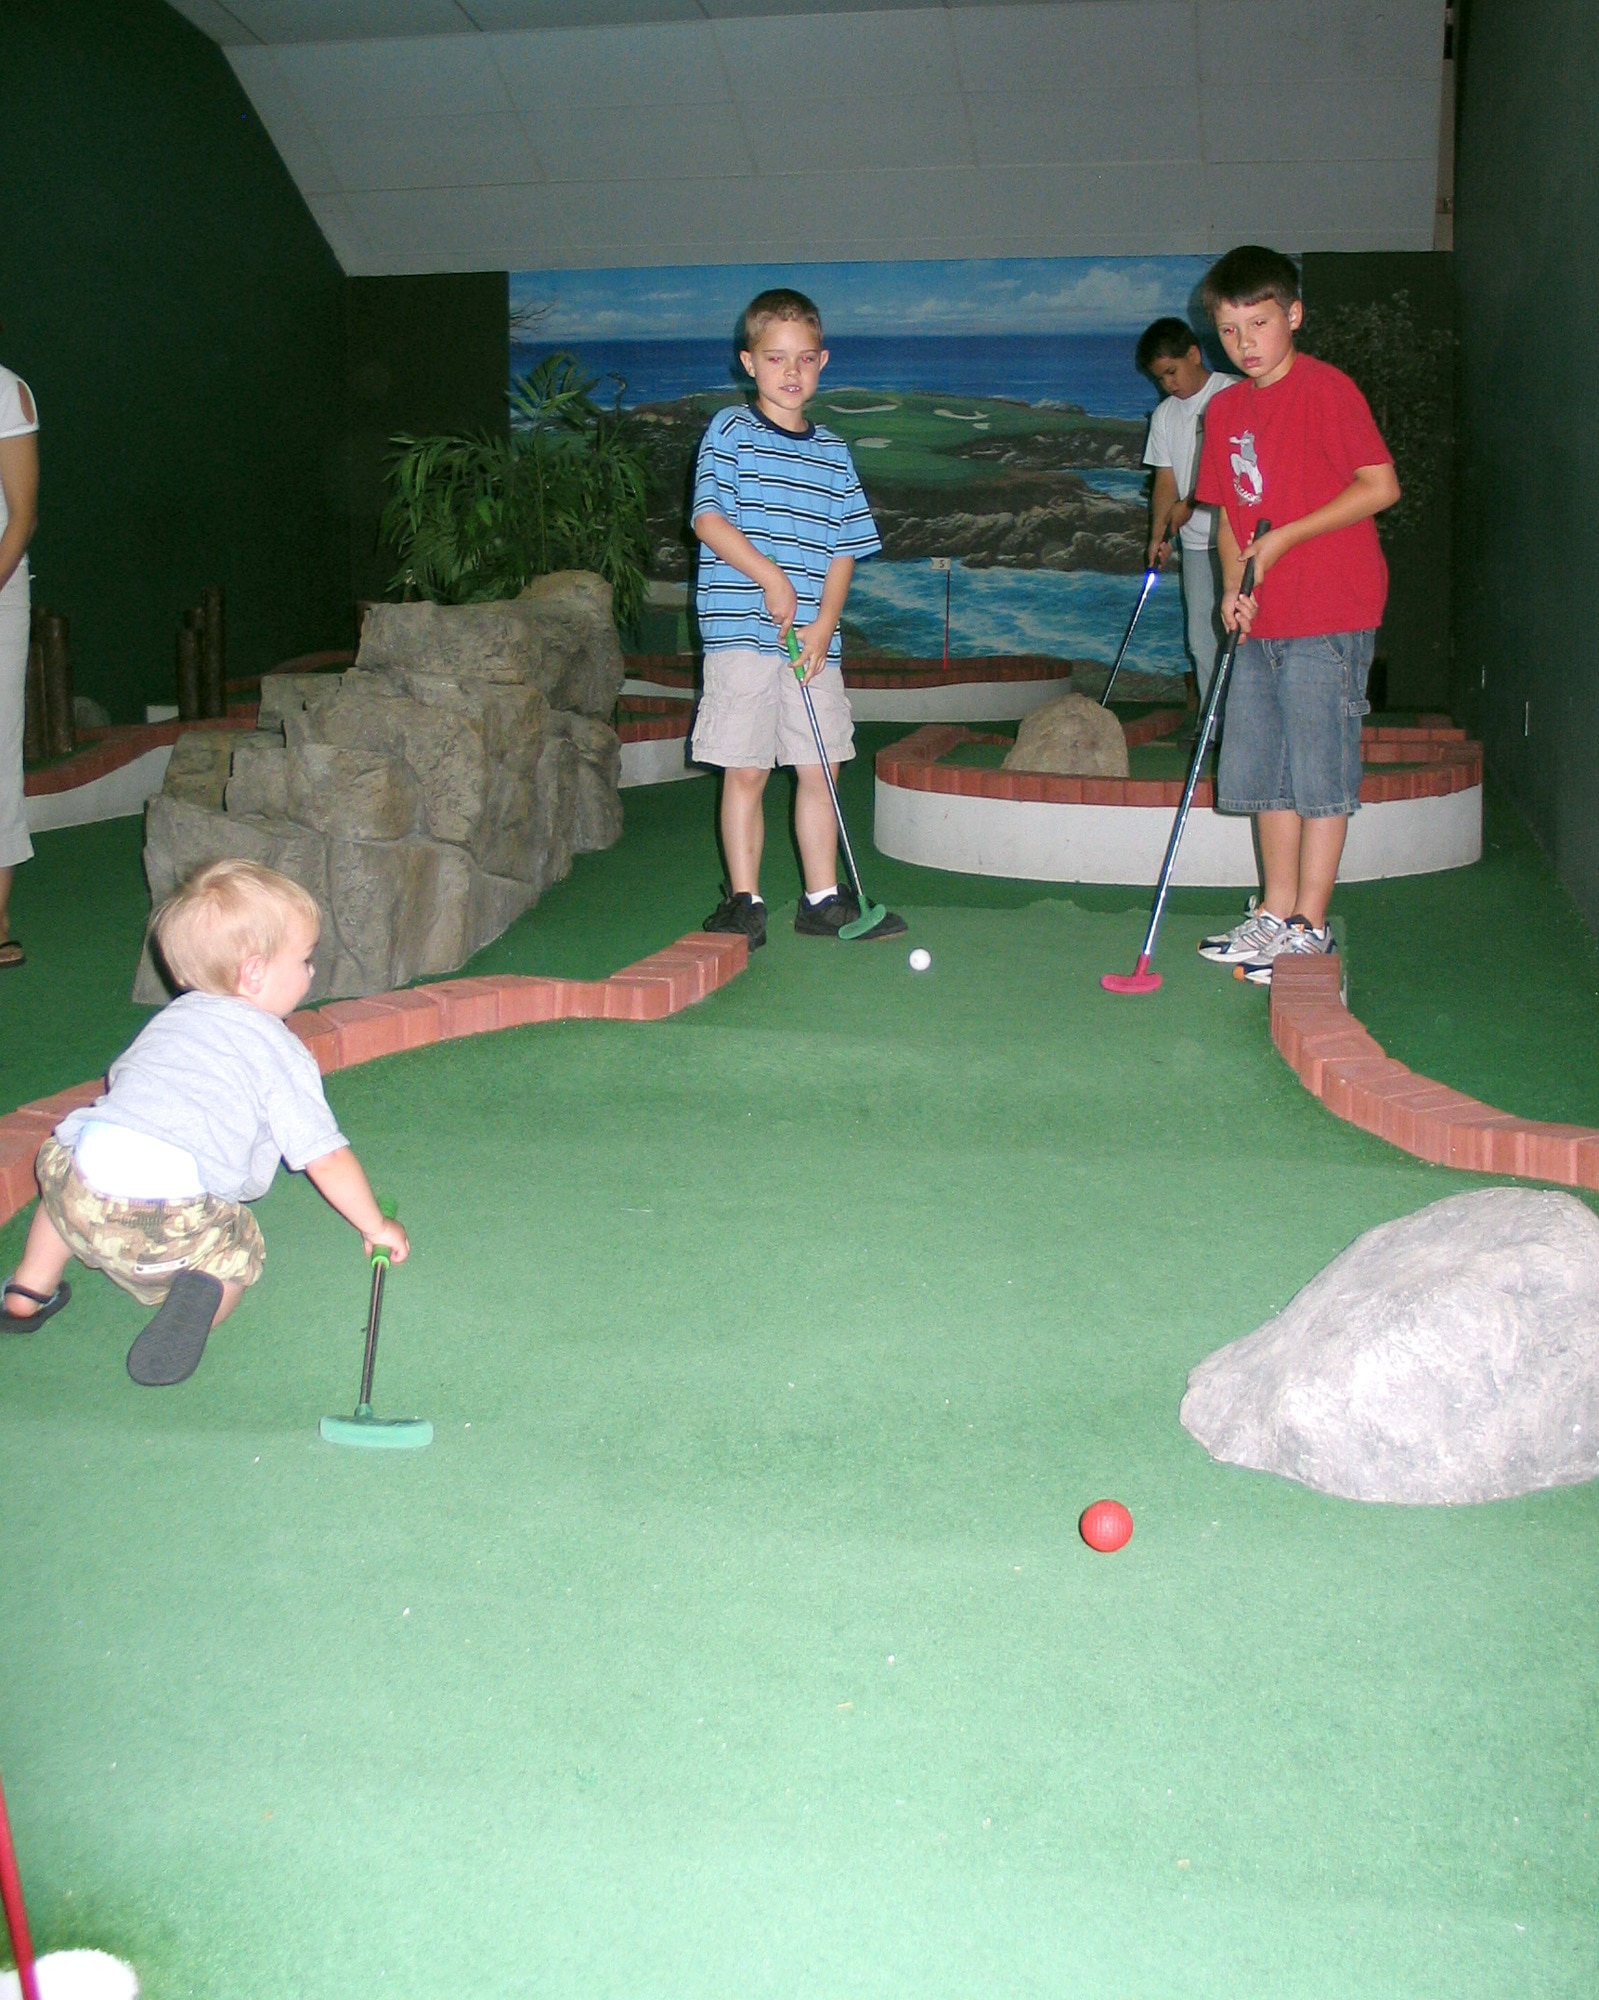 FAIRCHILD AIR FORCE BASE, Wash. – Ian McNerney (left), 7, son of Lt. Col. Michael McNerney, 66th Training Squadron director of operations; and Erik Holm, 8, son of Lt. Col. John Holm, 66th Training Squadron commander, play put-put golf at the Funspot June 21 during Family Fun Day. More than 460 people flocked to the Funspot to bowl, golf, roller skate and face paint during the annual event. (U.S. Air Force photo/Staff Sgt. Connie L. Bias)
